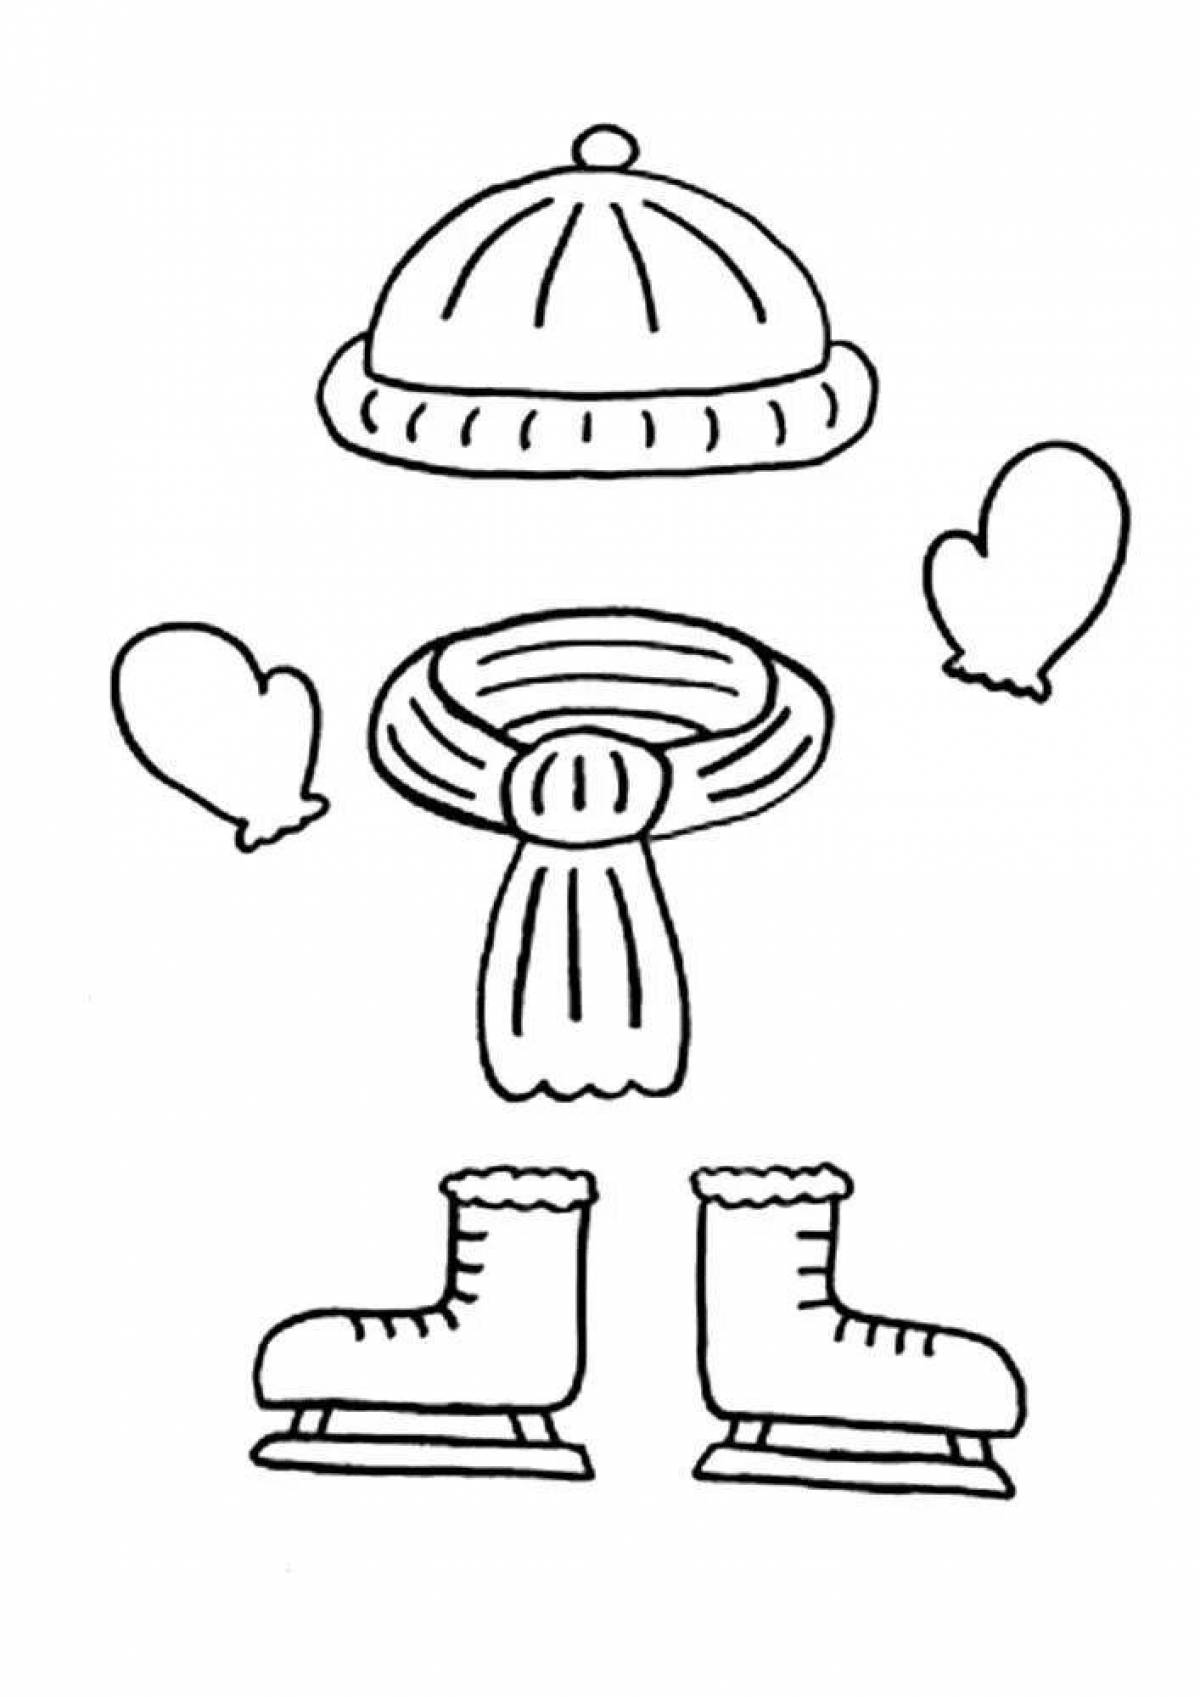 Glittering scarf and hat coloring page